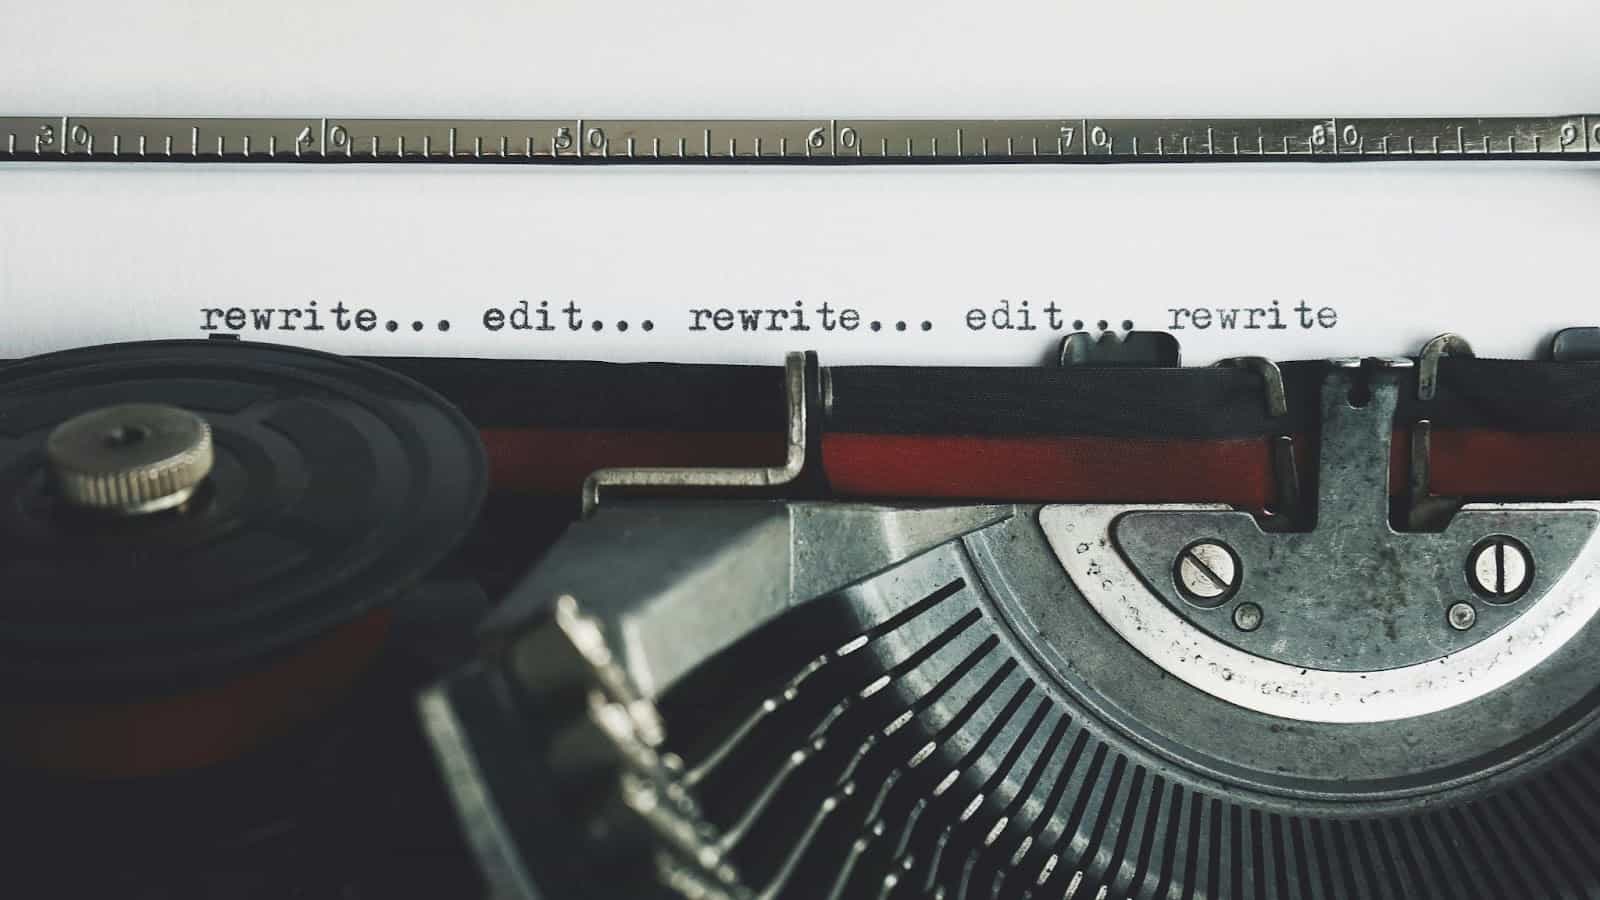 Close-up of a typewriter with text: rewrite... edit...